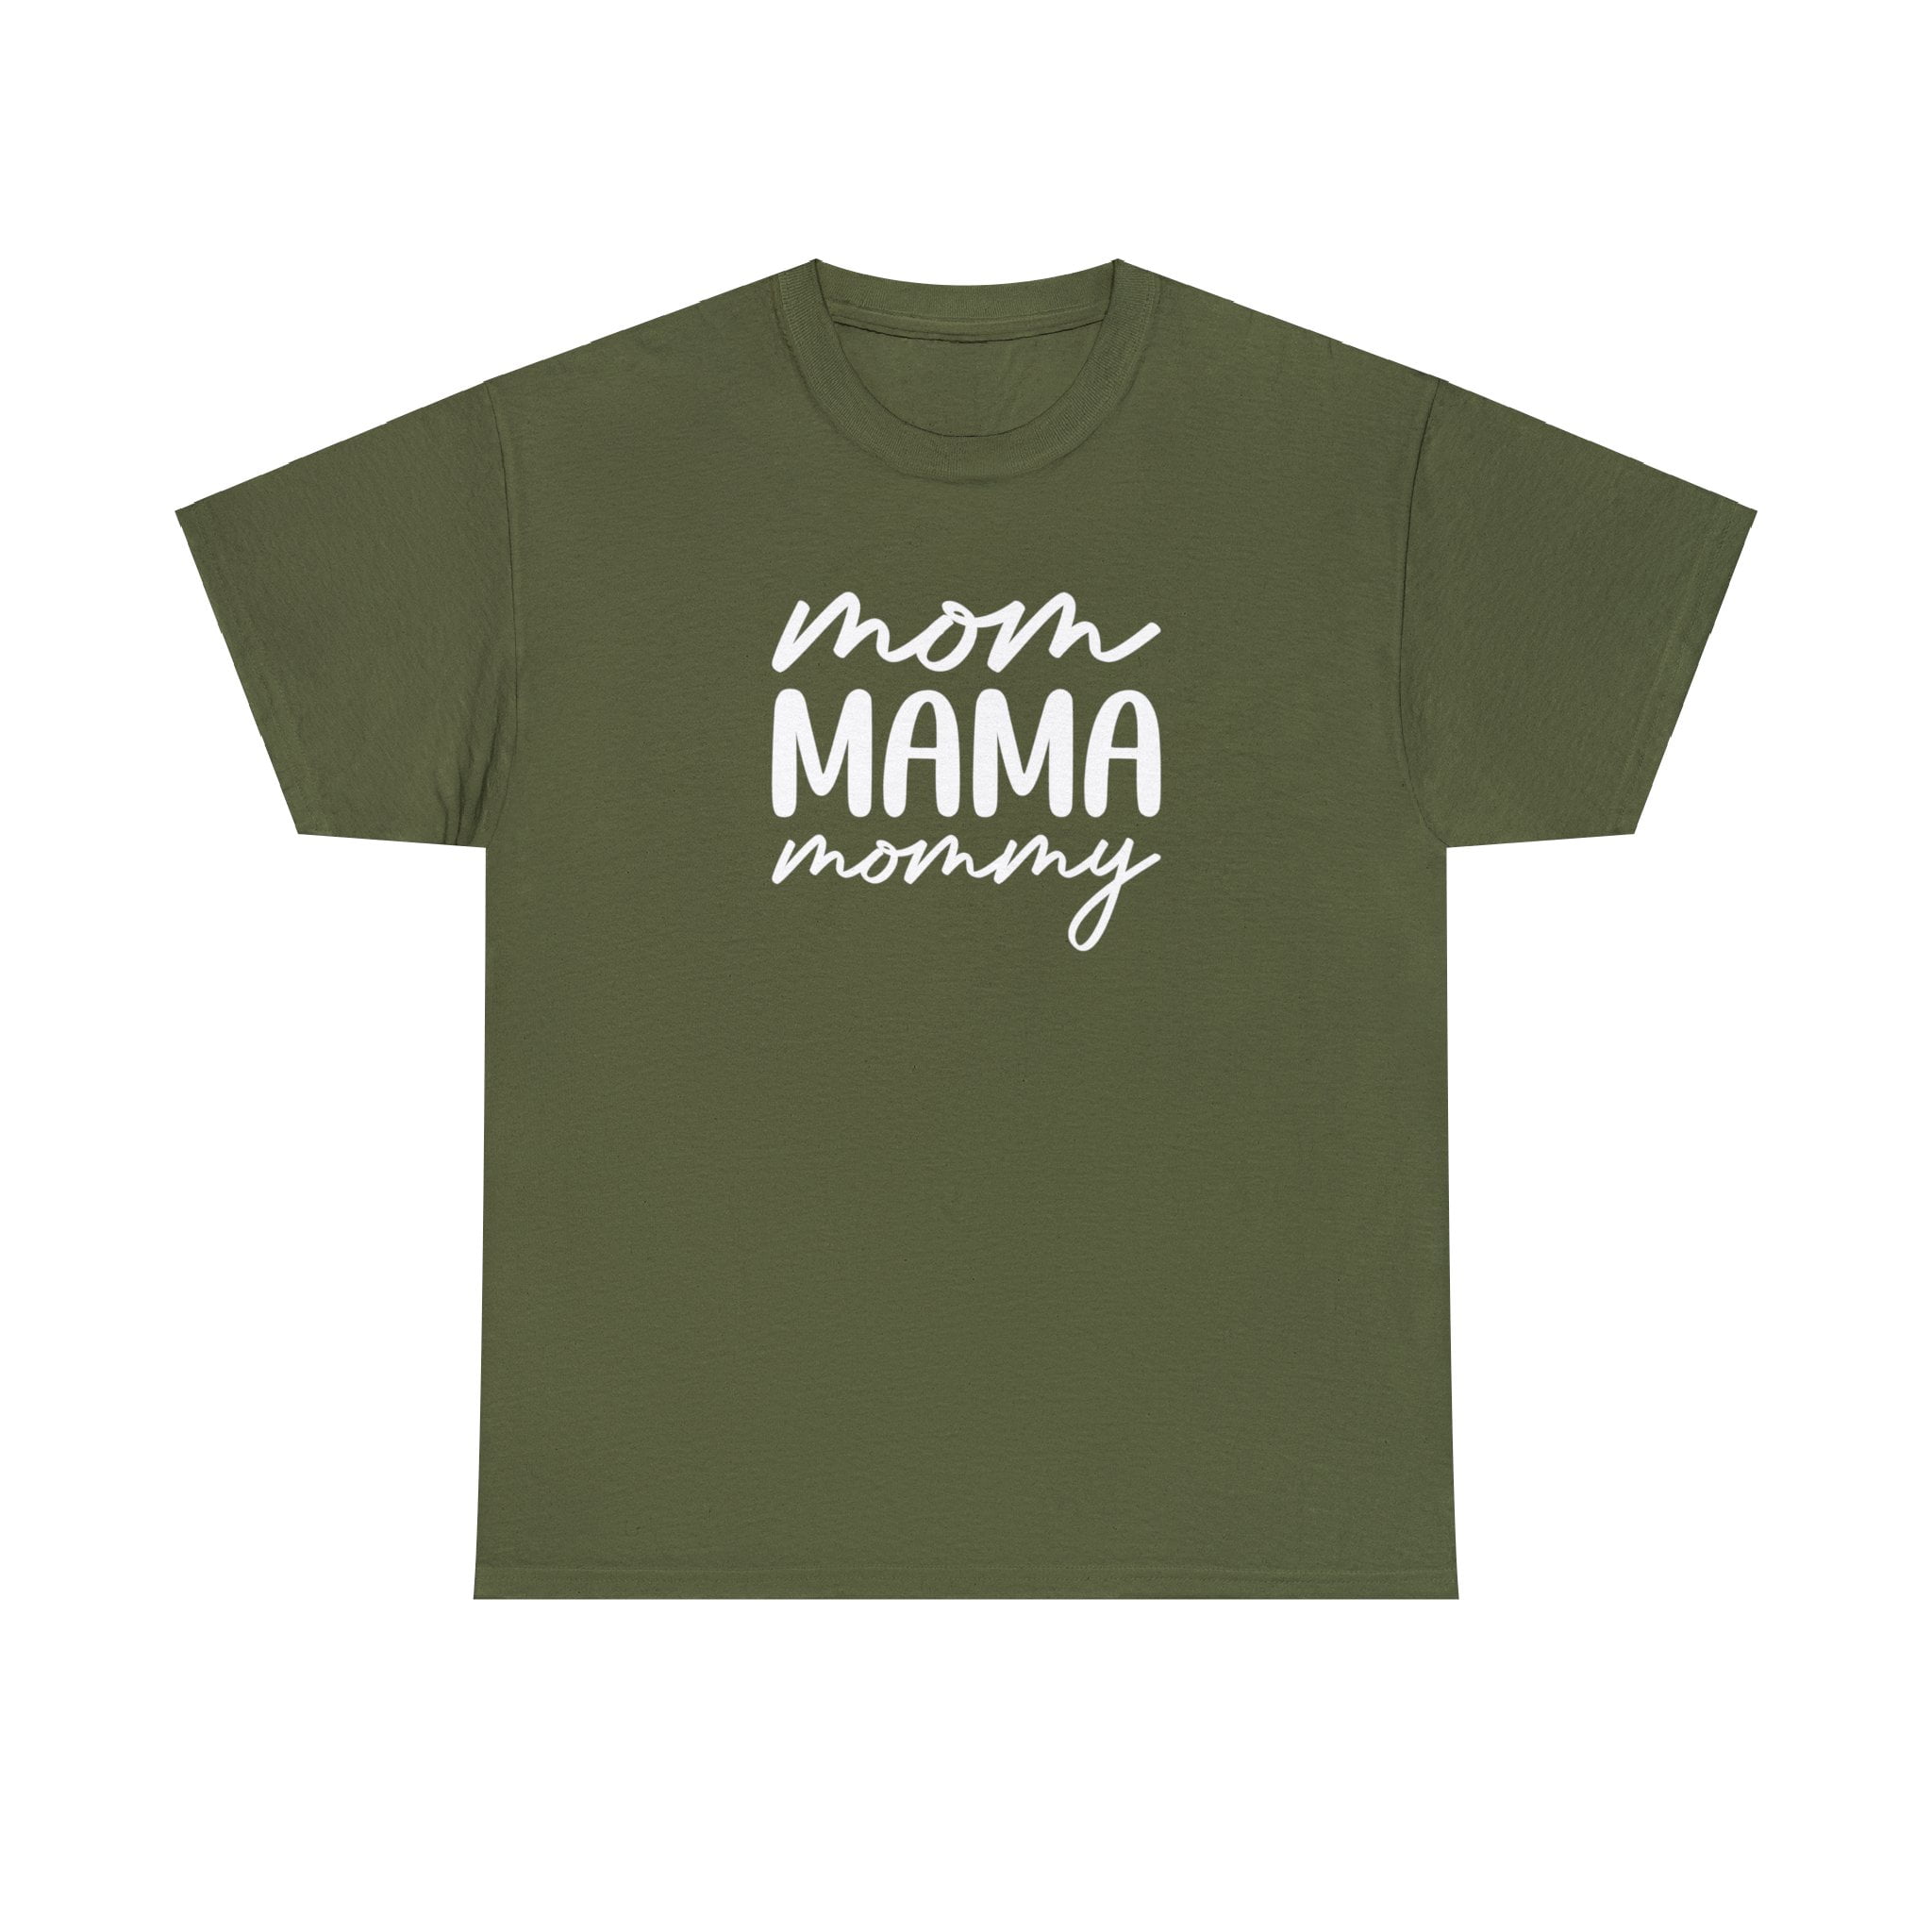 Green Maternity T Shirt With 'Yummy Mummy' Slogan, Want That Trend